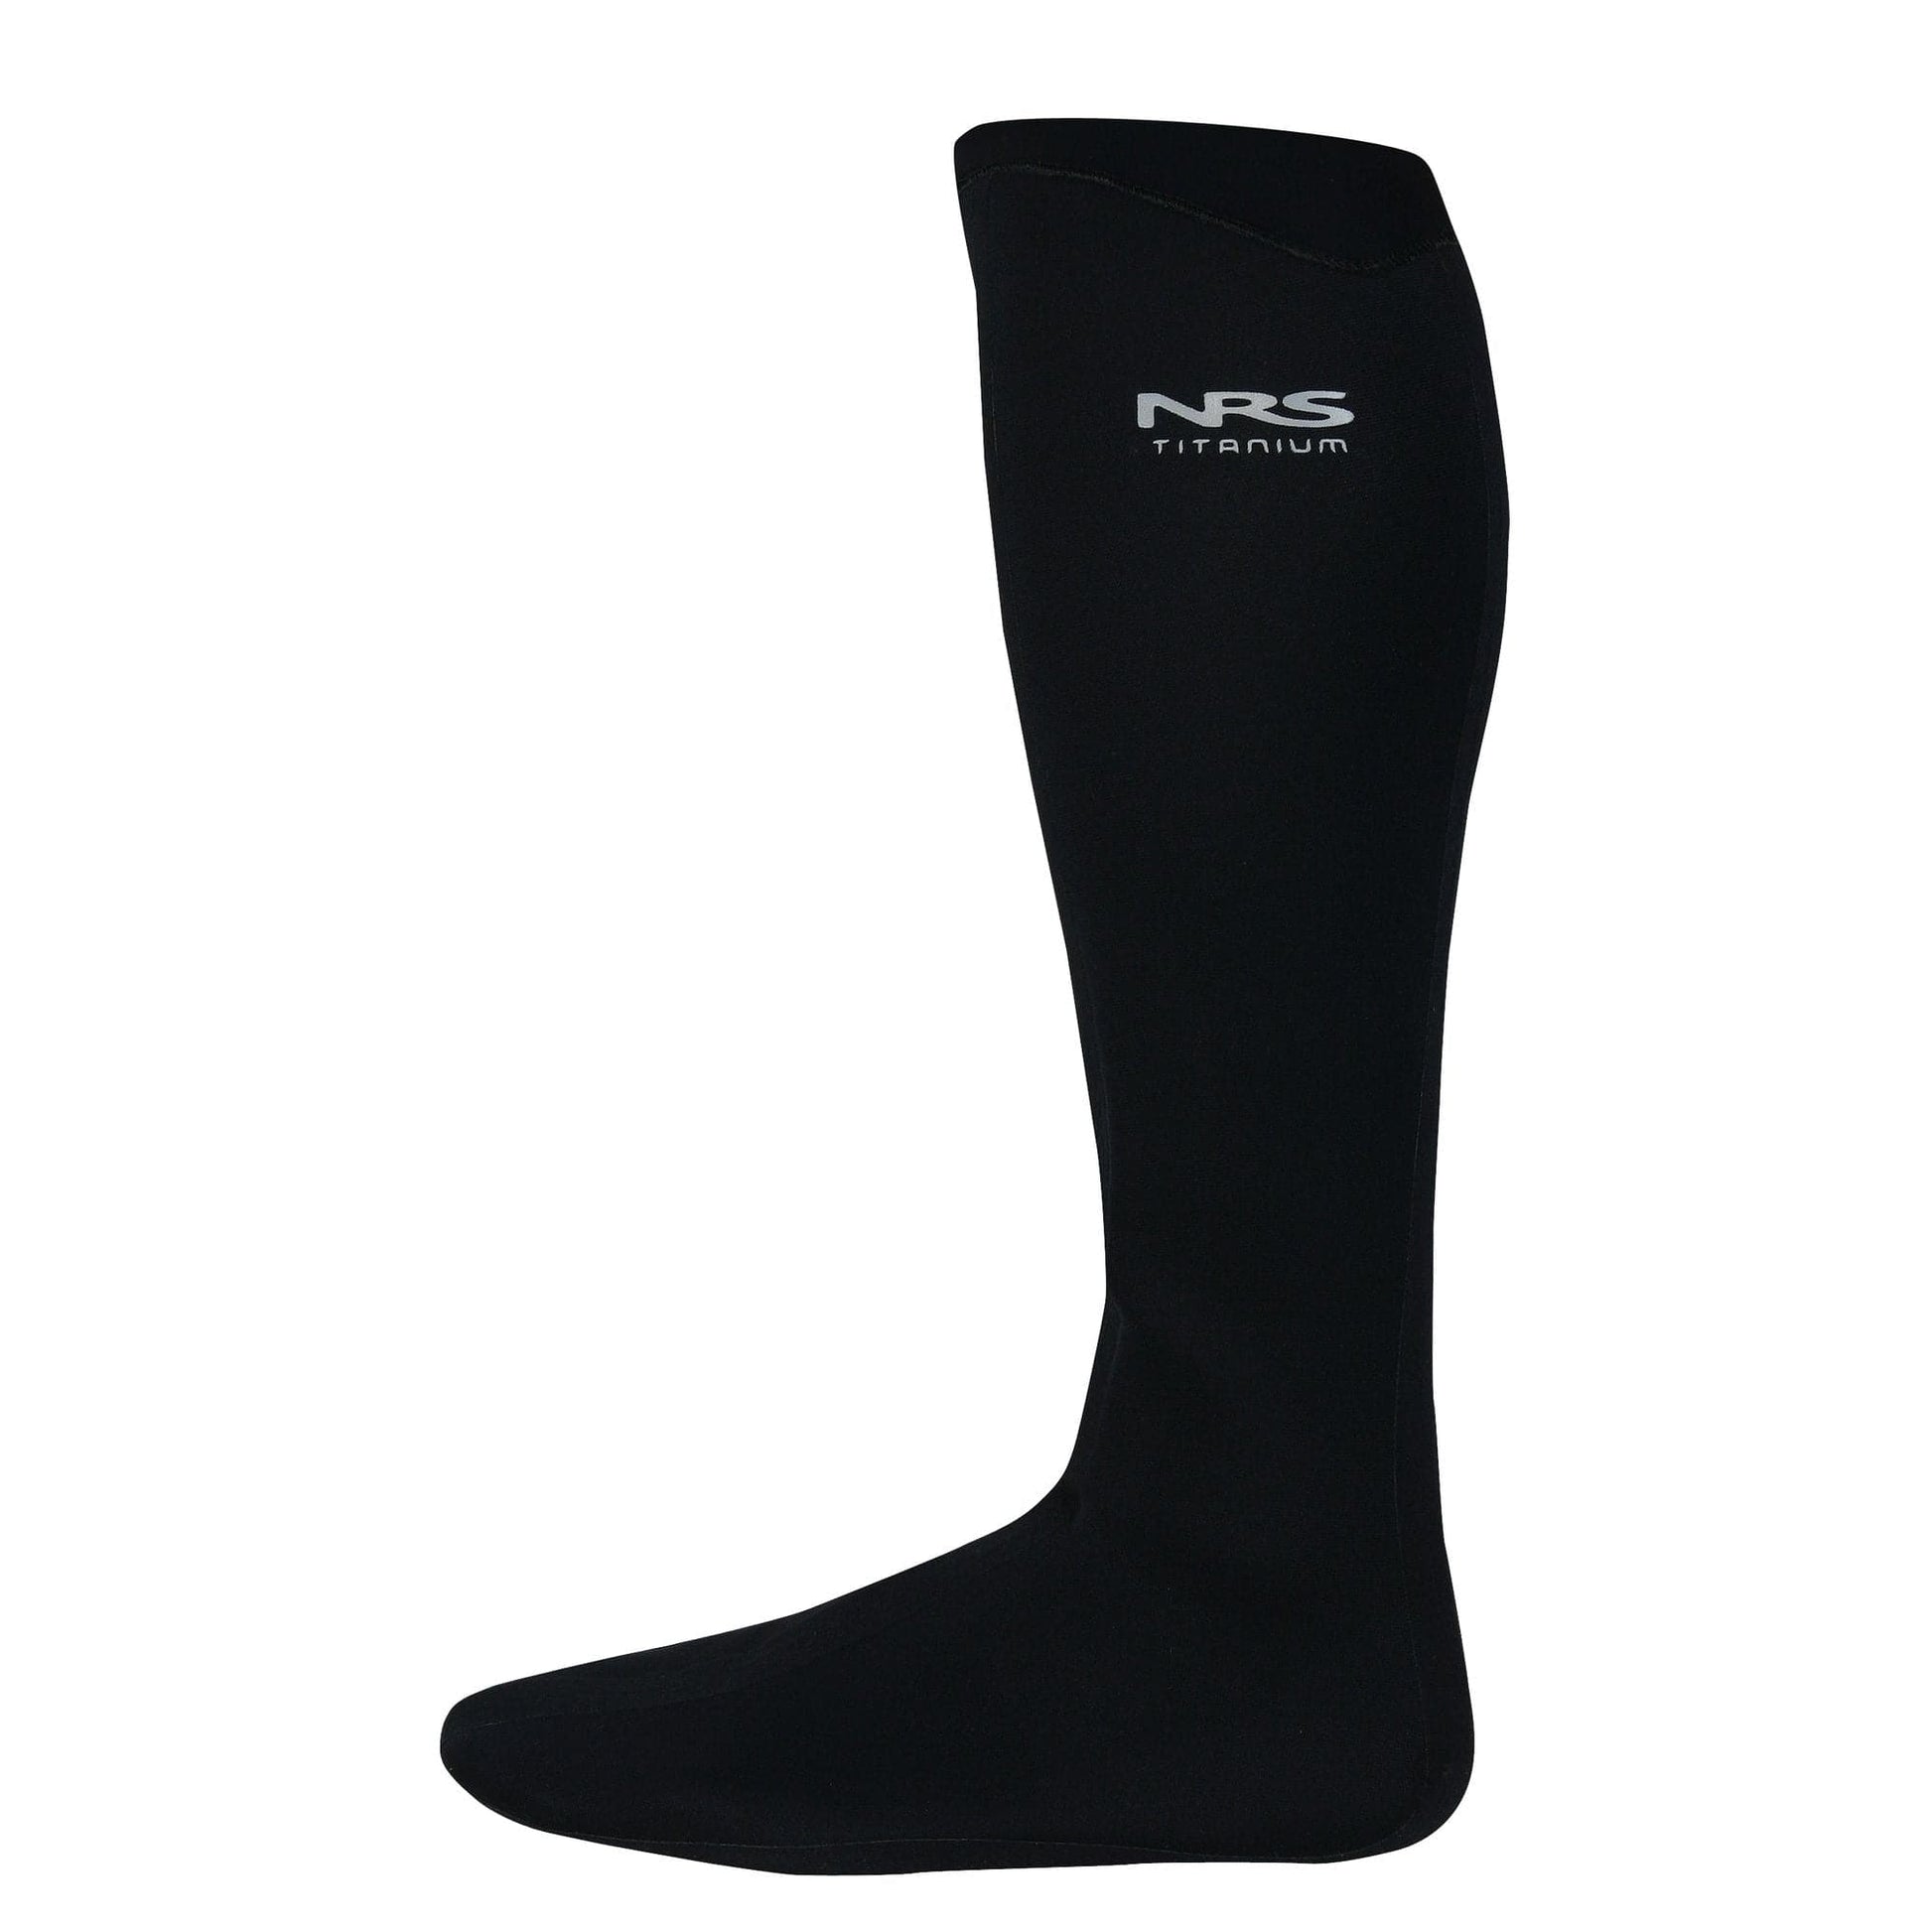 Featuring the Boundary Sock  manufactured by NRS shown here from a second angle.